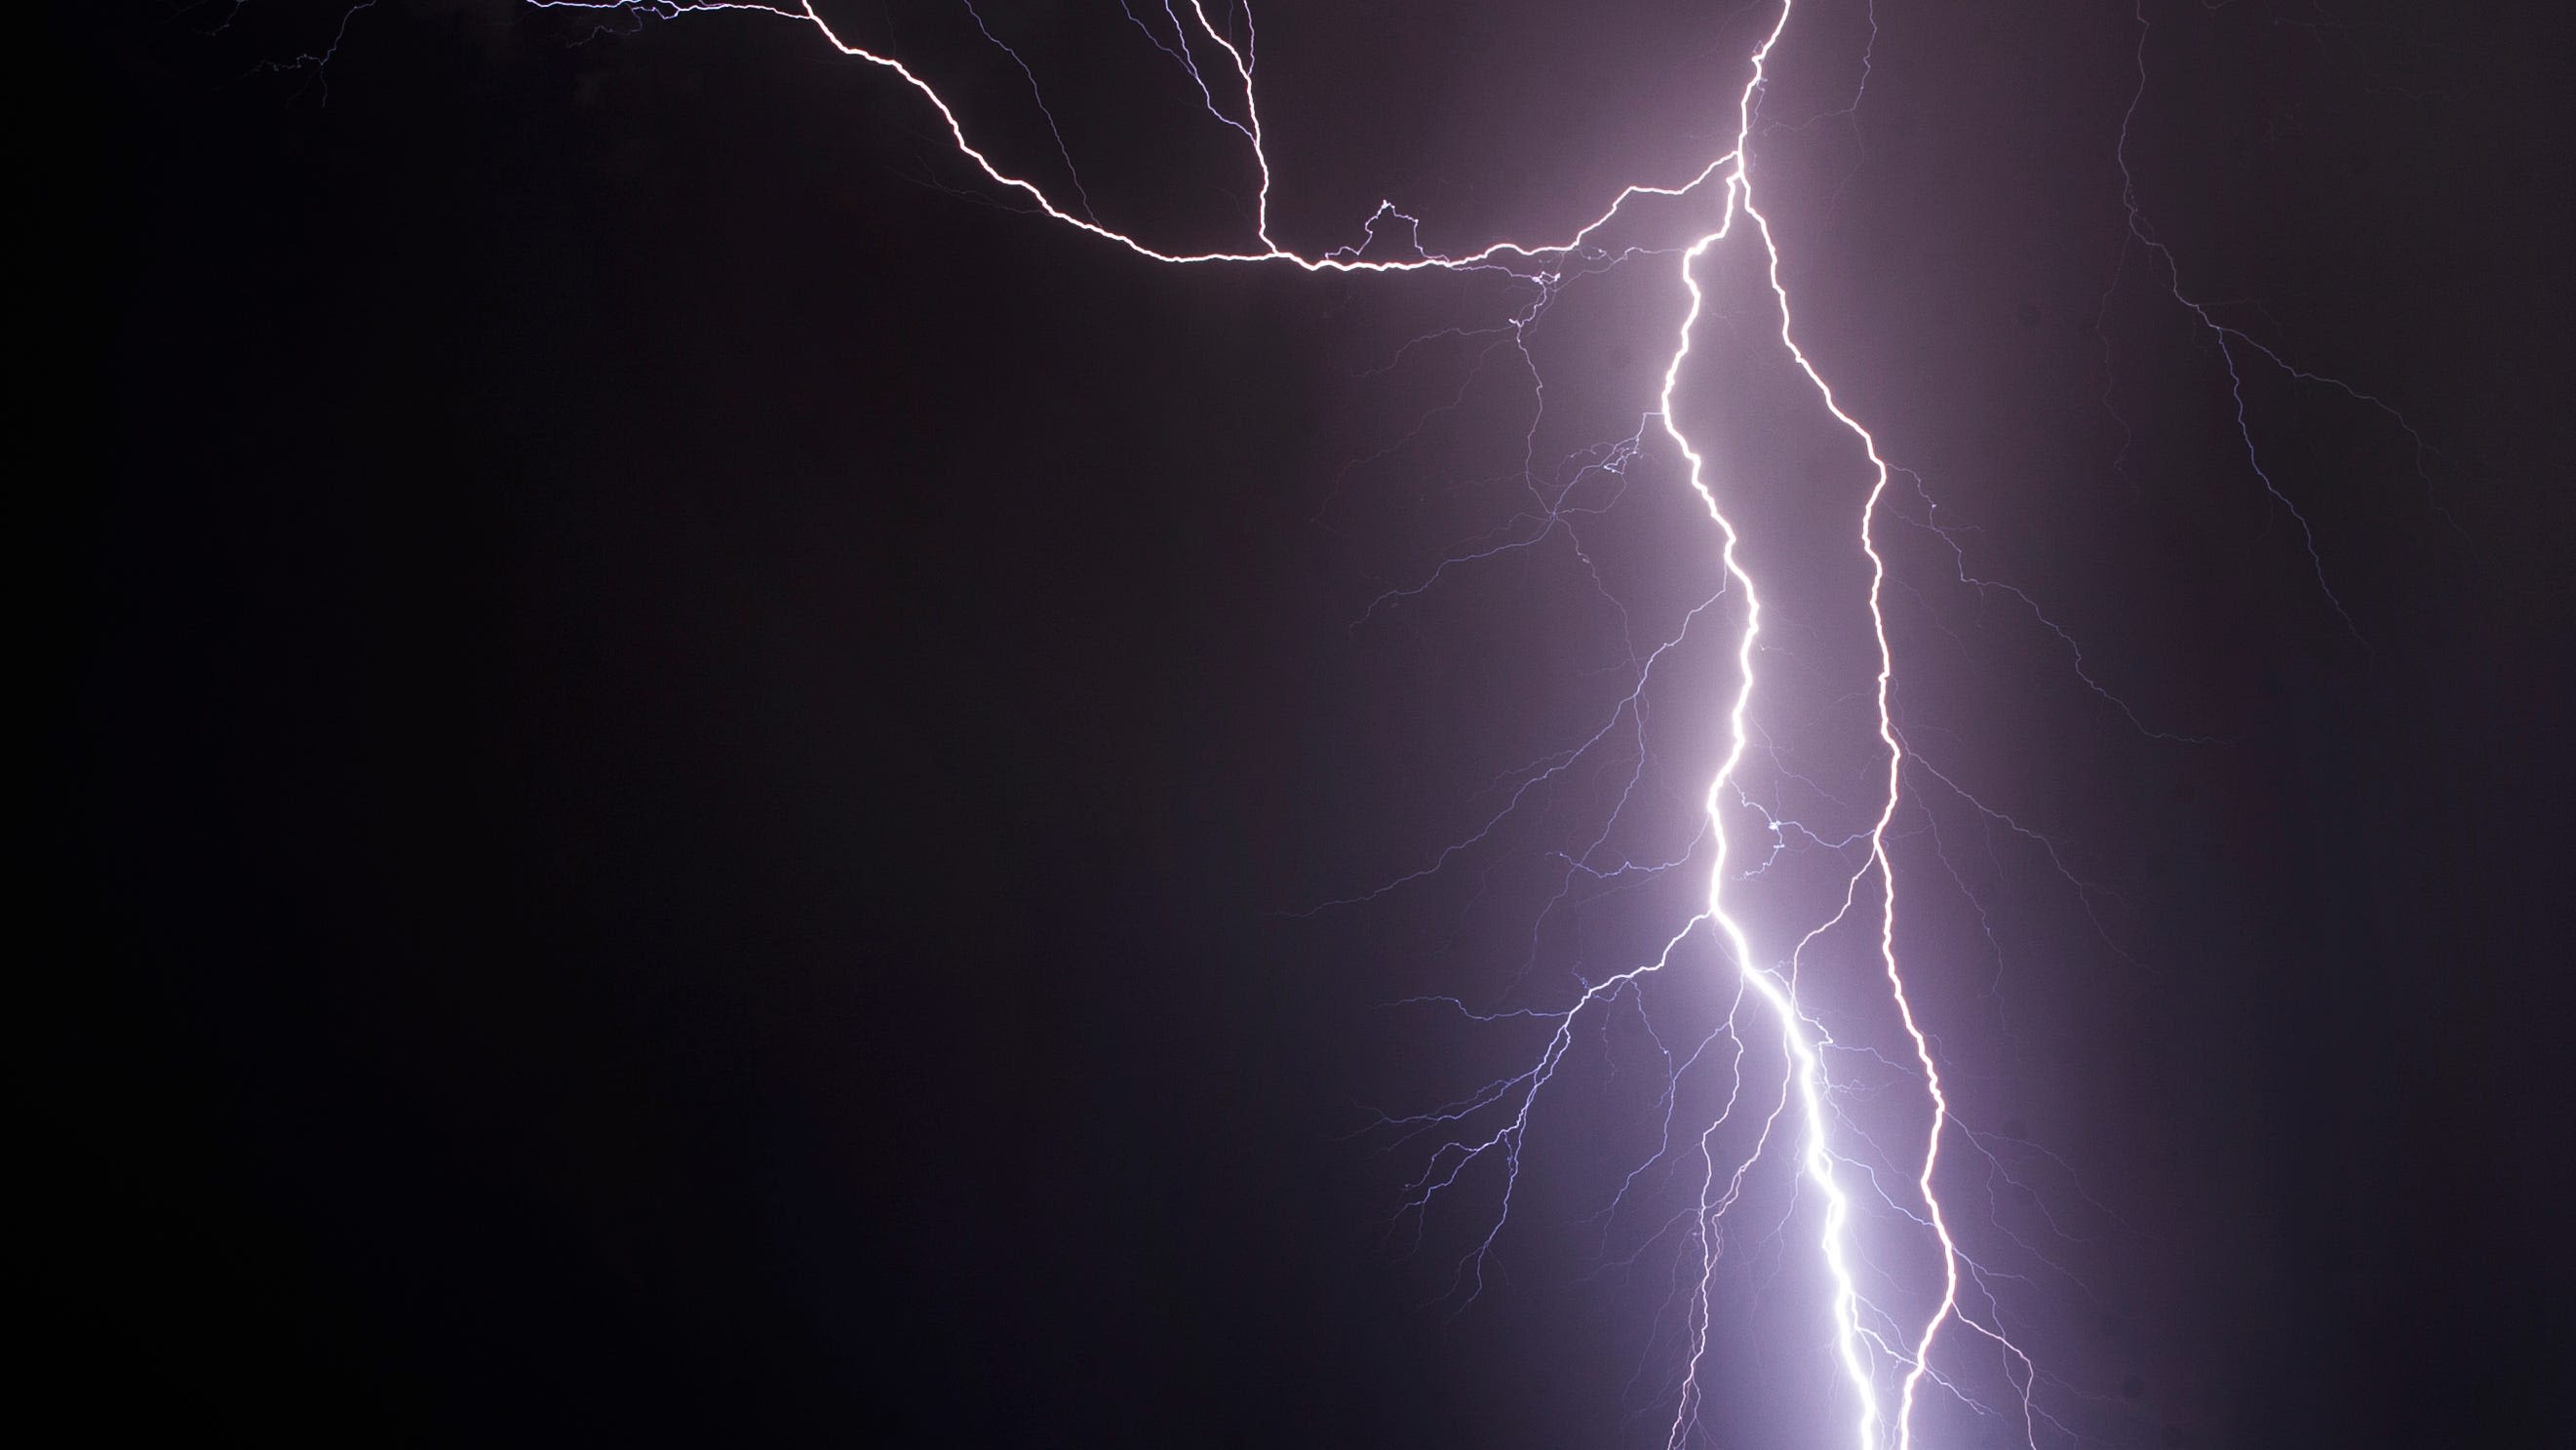 Lightning safety: Did you know? It doesn't have to be raining to be struck